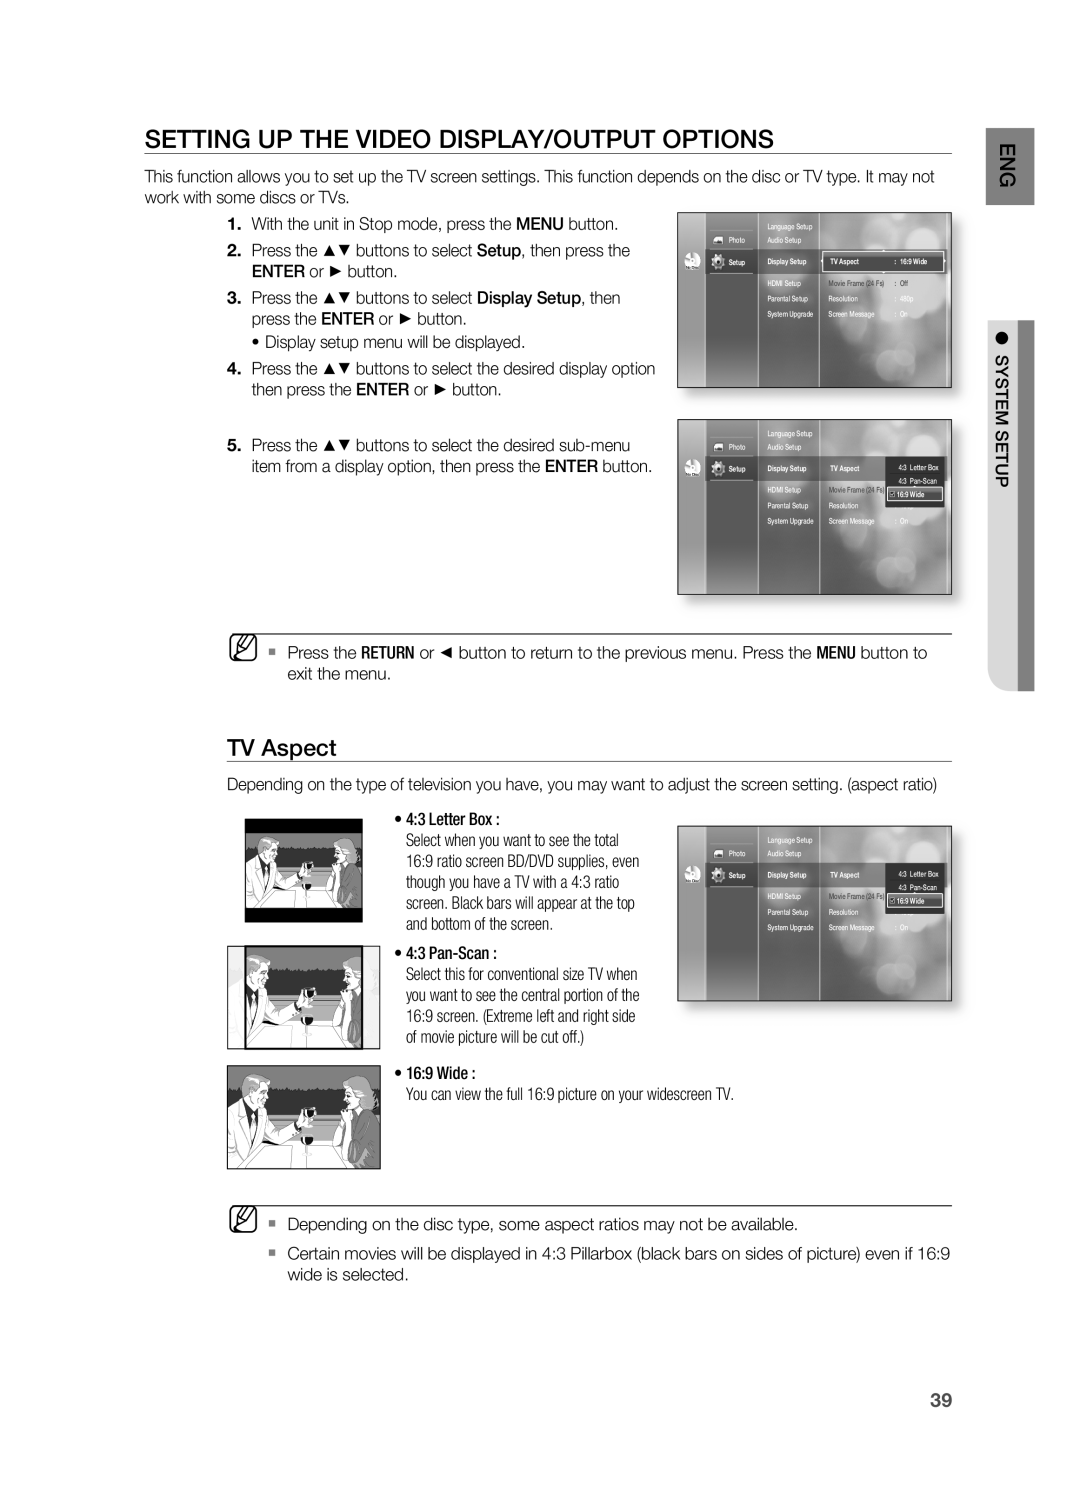 Samsung AH68-02019S manual SETTIng UP THE VIDEO DISPLAY/OUTPUT OPTIOnS, TV Aspect 